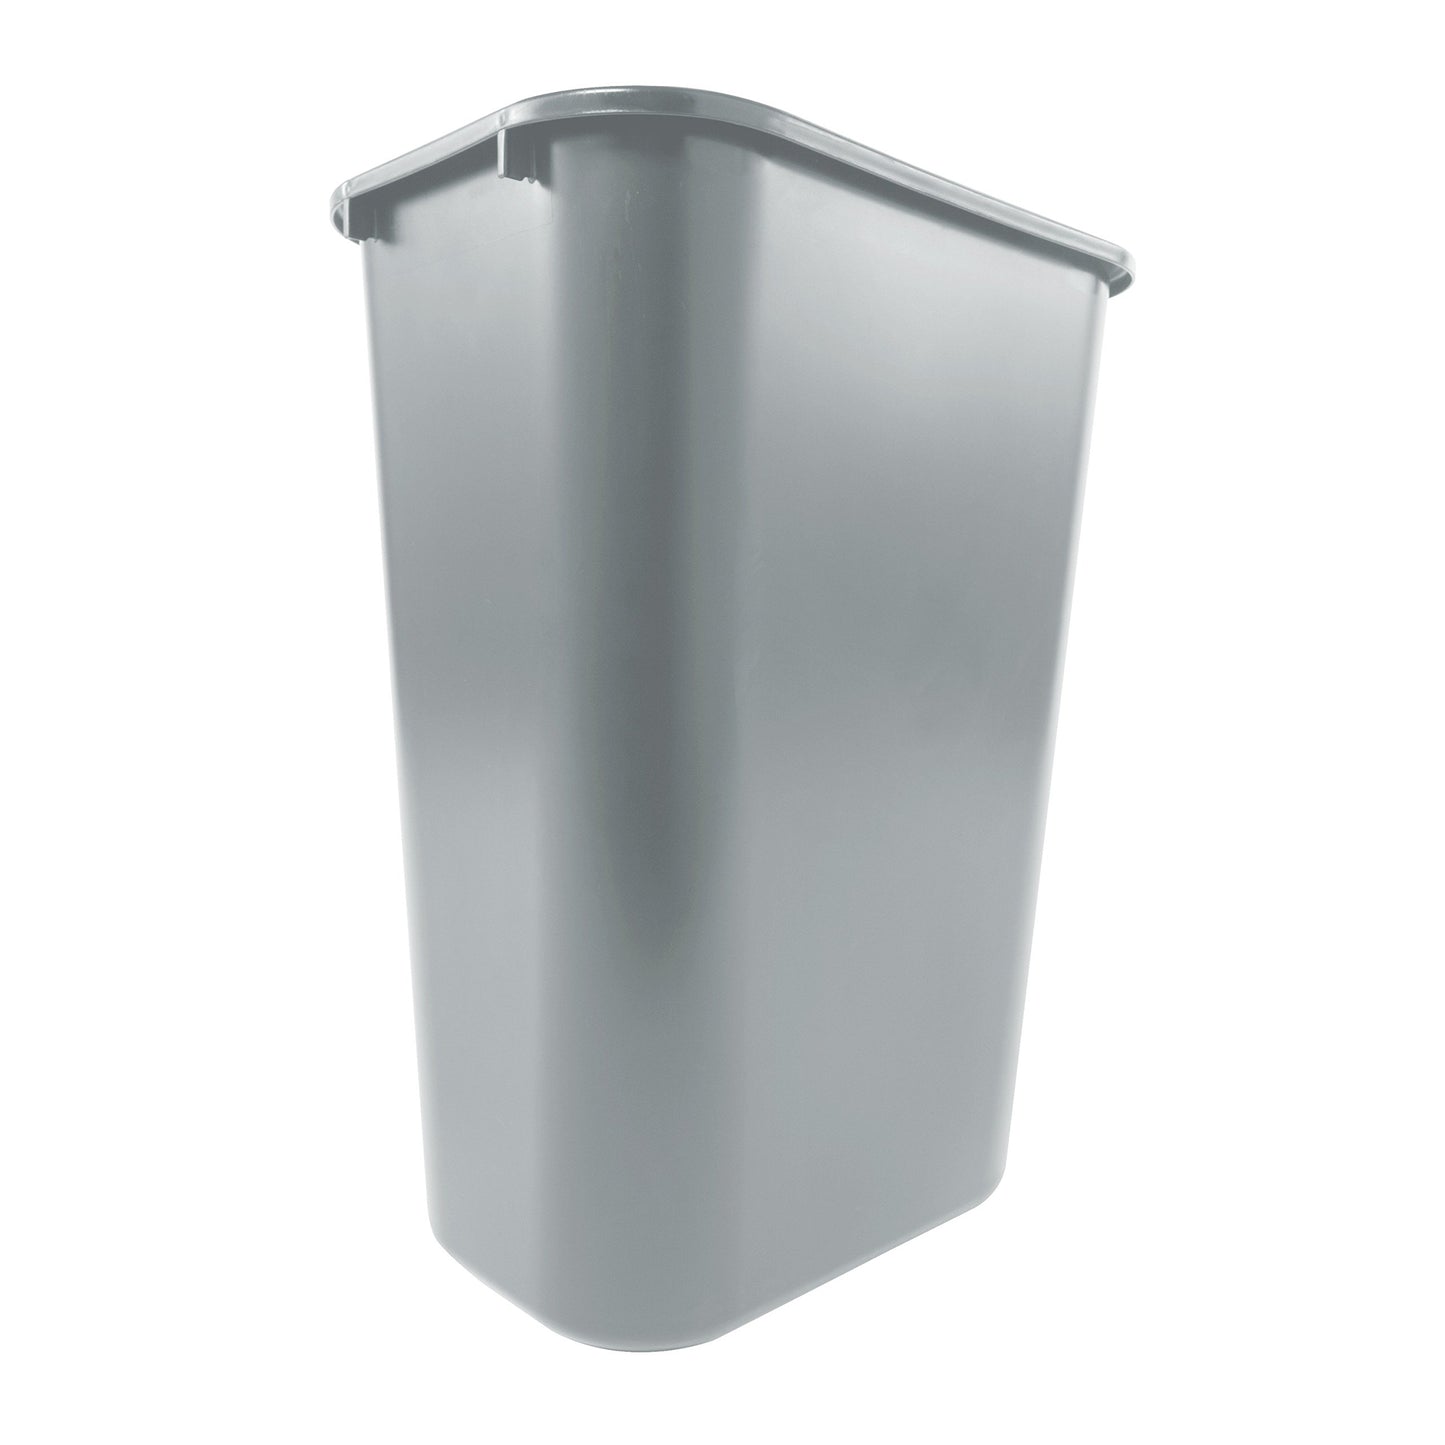 Rubbermaid Commercial Deskside Wastebasket Rubbermaid Commercial Products